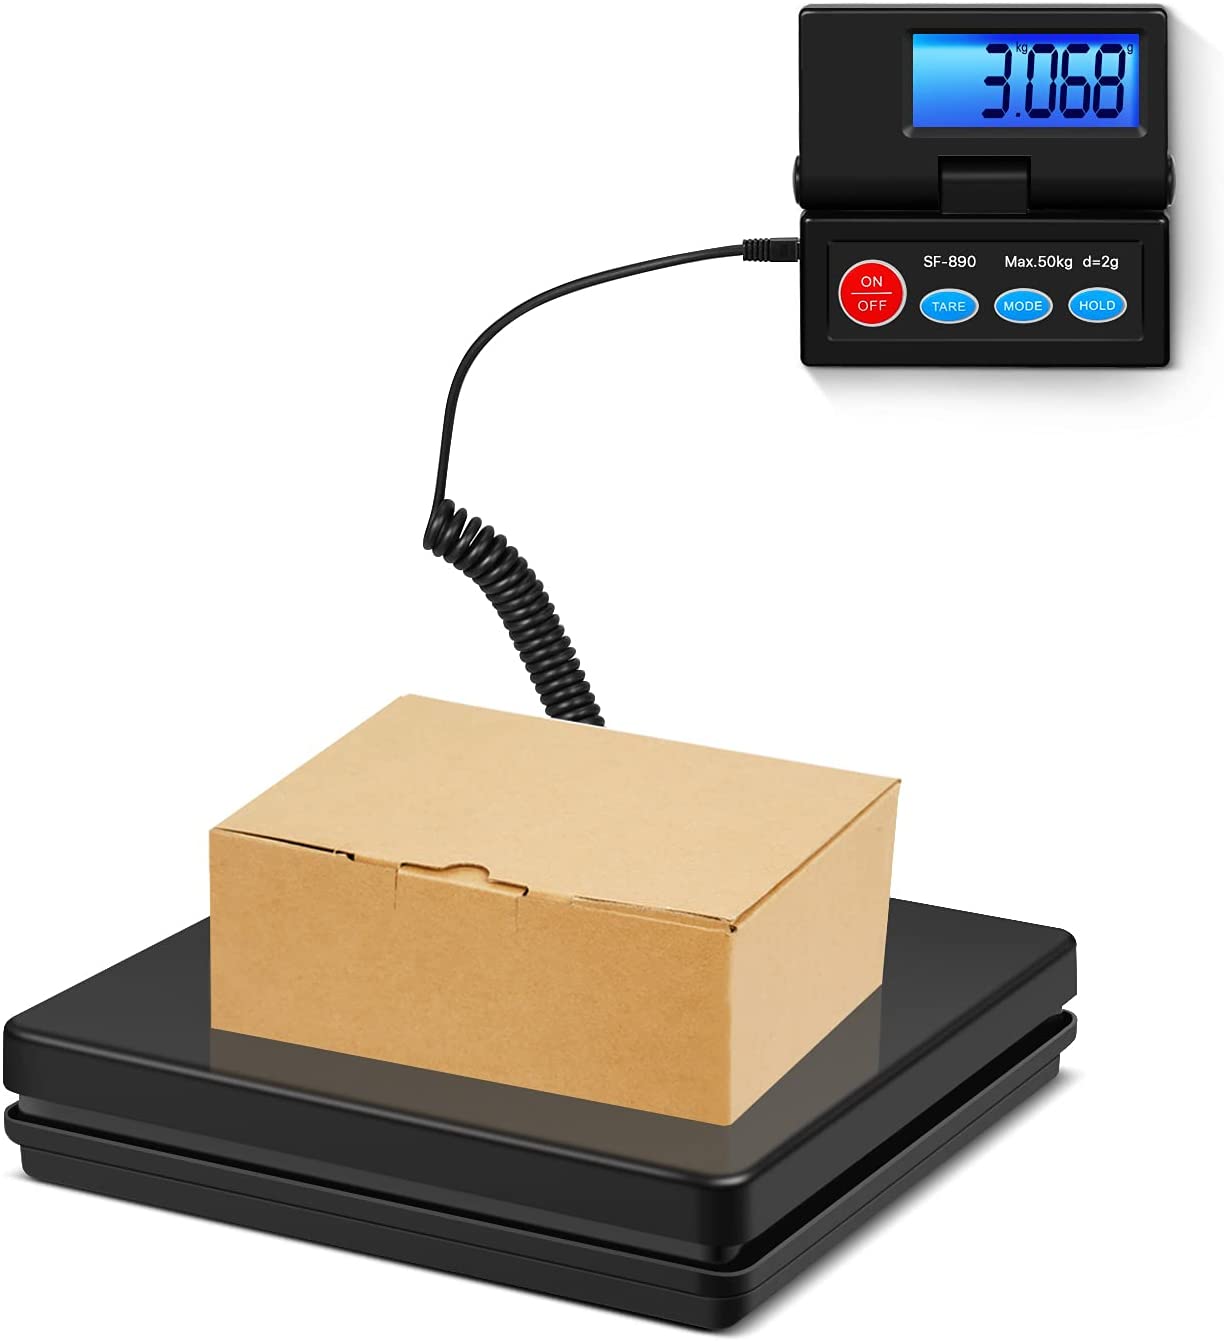 SF-890 Digital Shipping and Postal Weight Scale